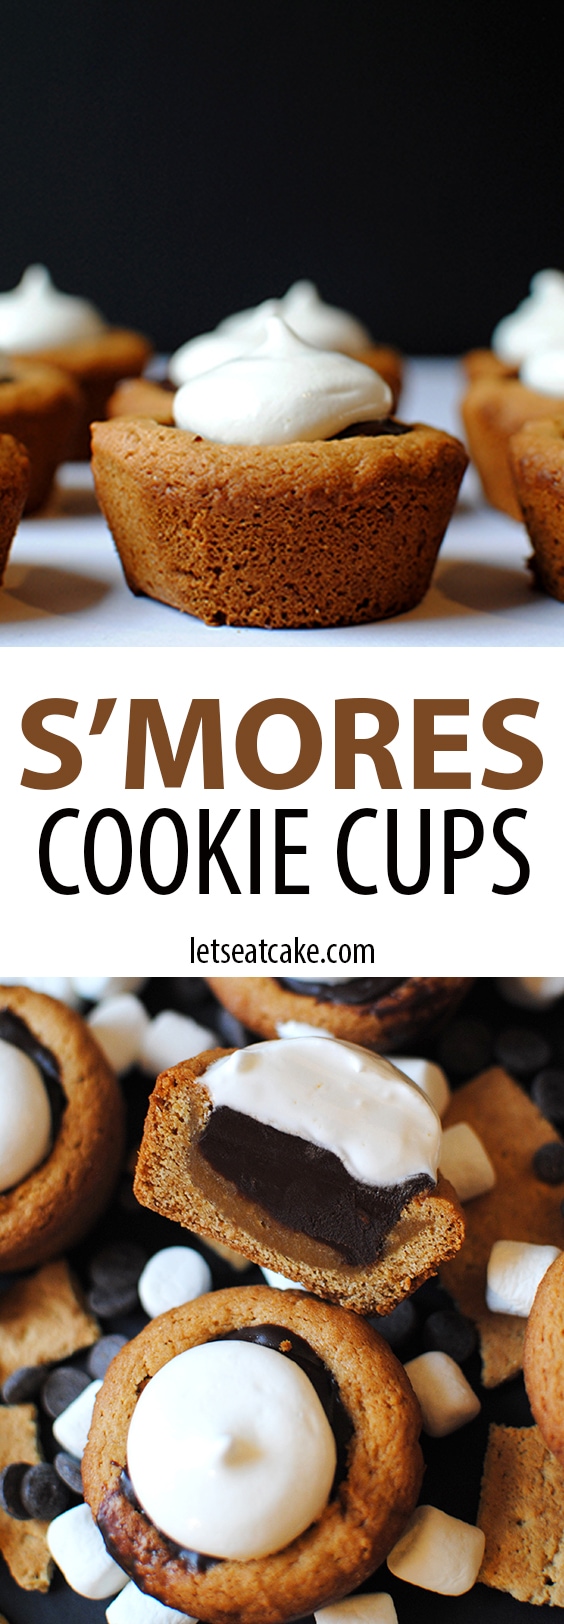 Smores Cookie Cups